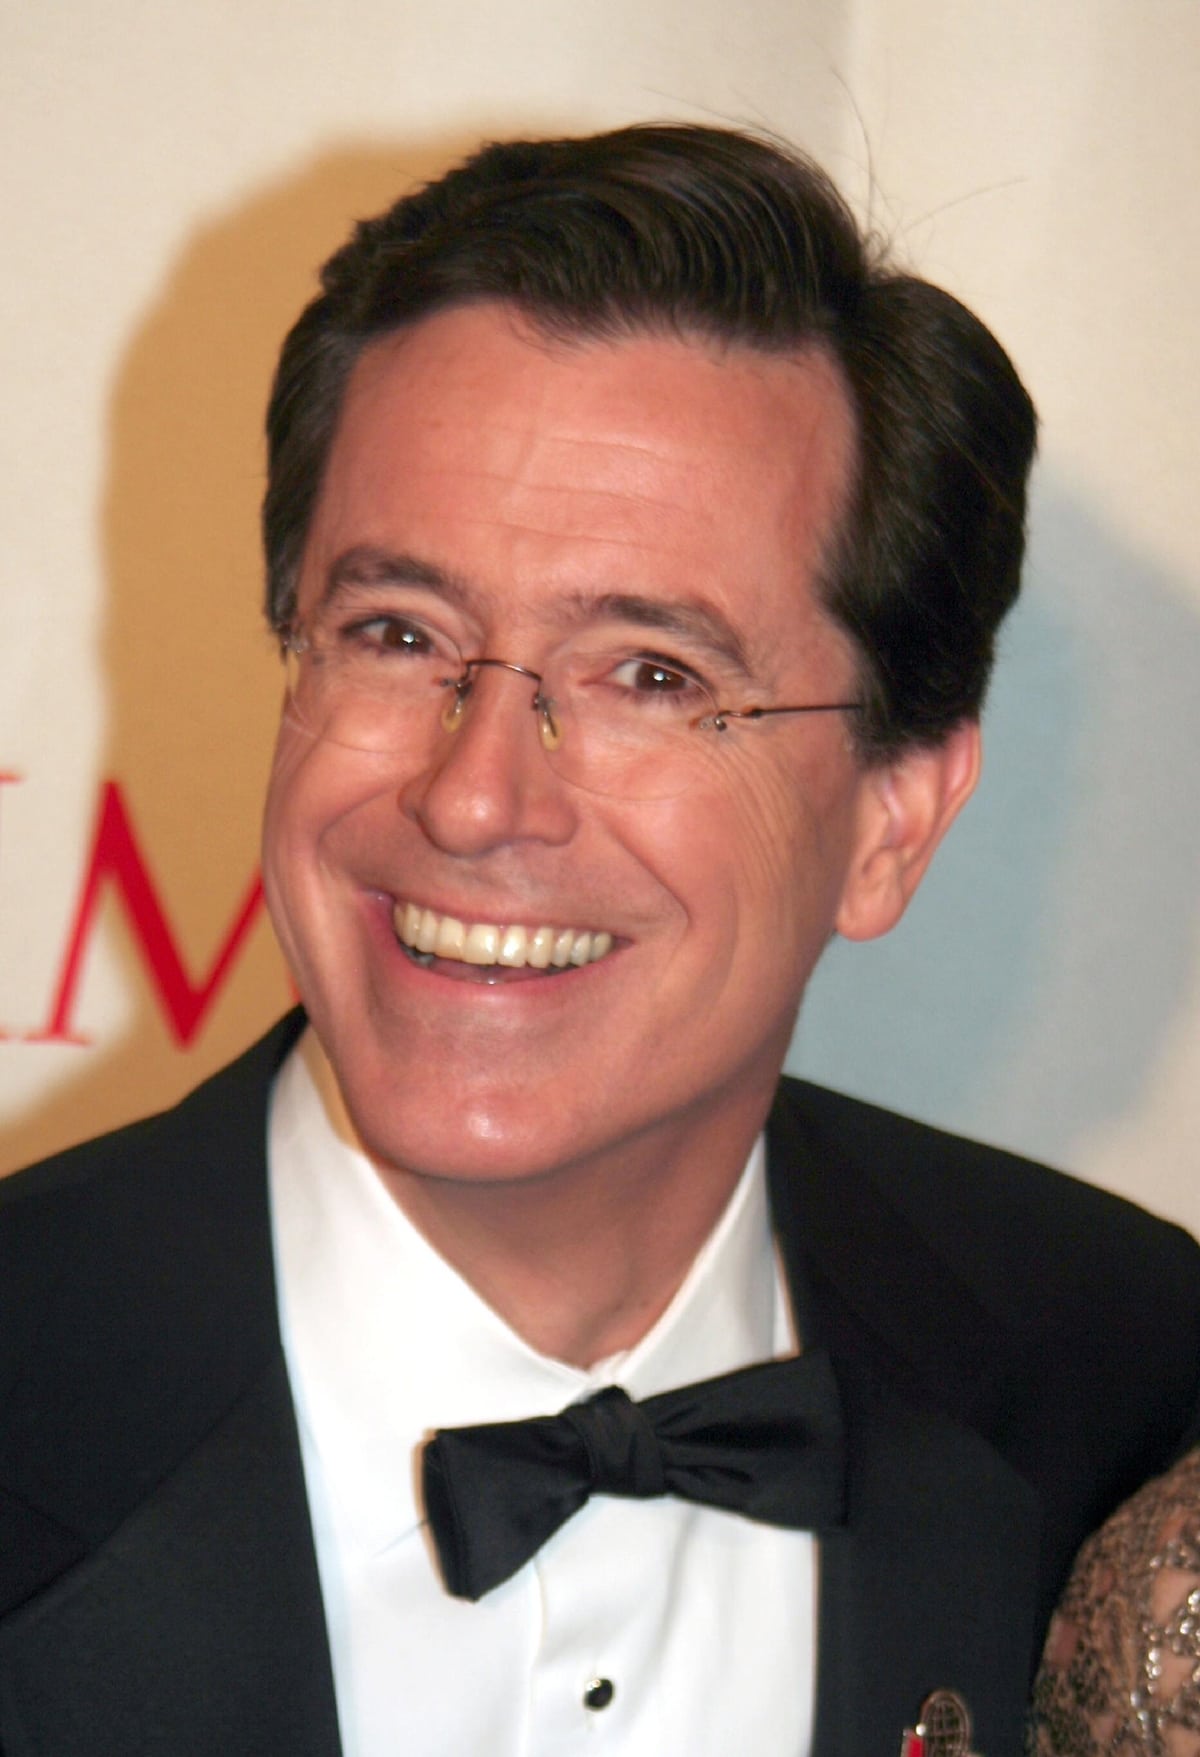 Stephen Colbert reconnected with his Christian faith when he was given a pocket Bible as a young man in Chicago